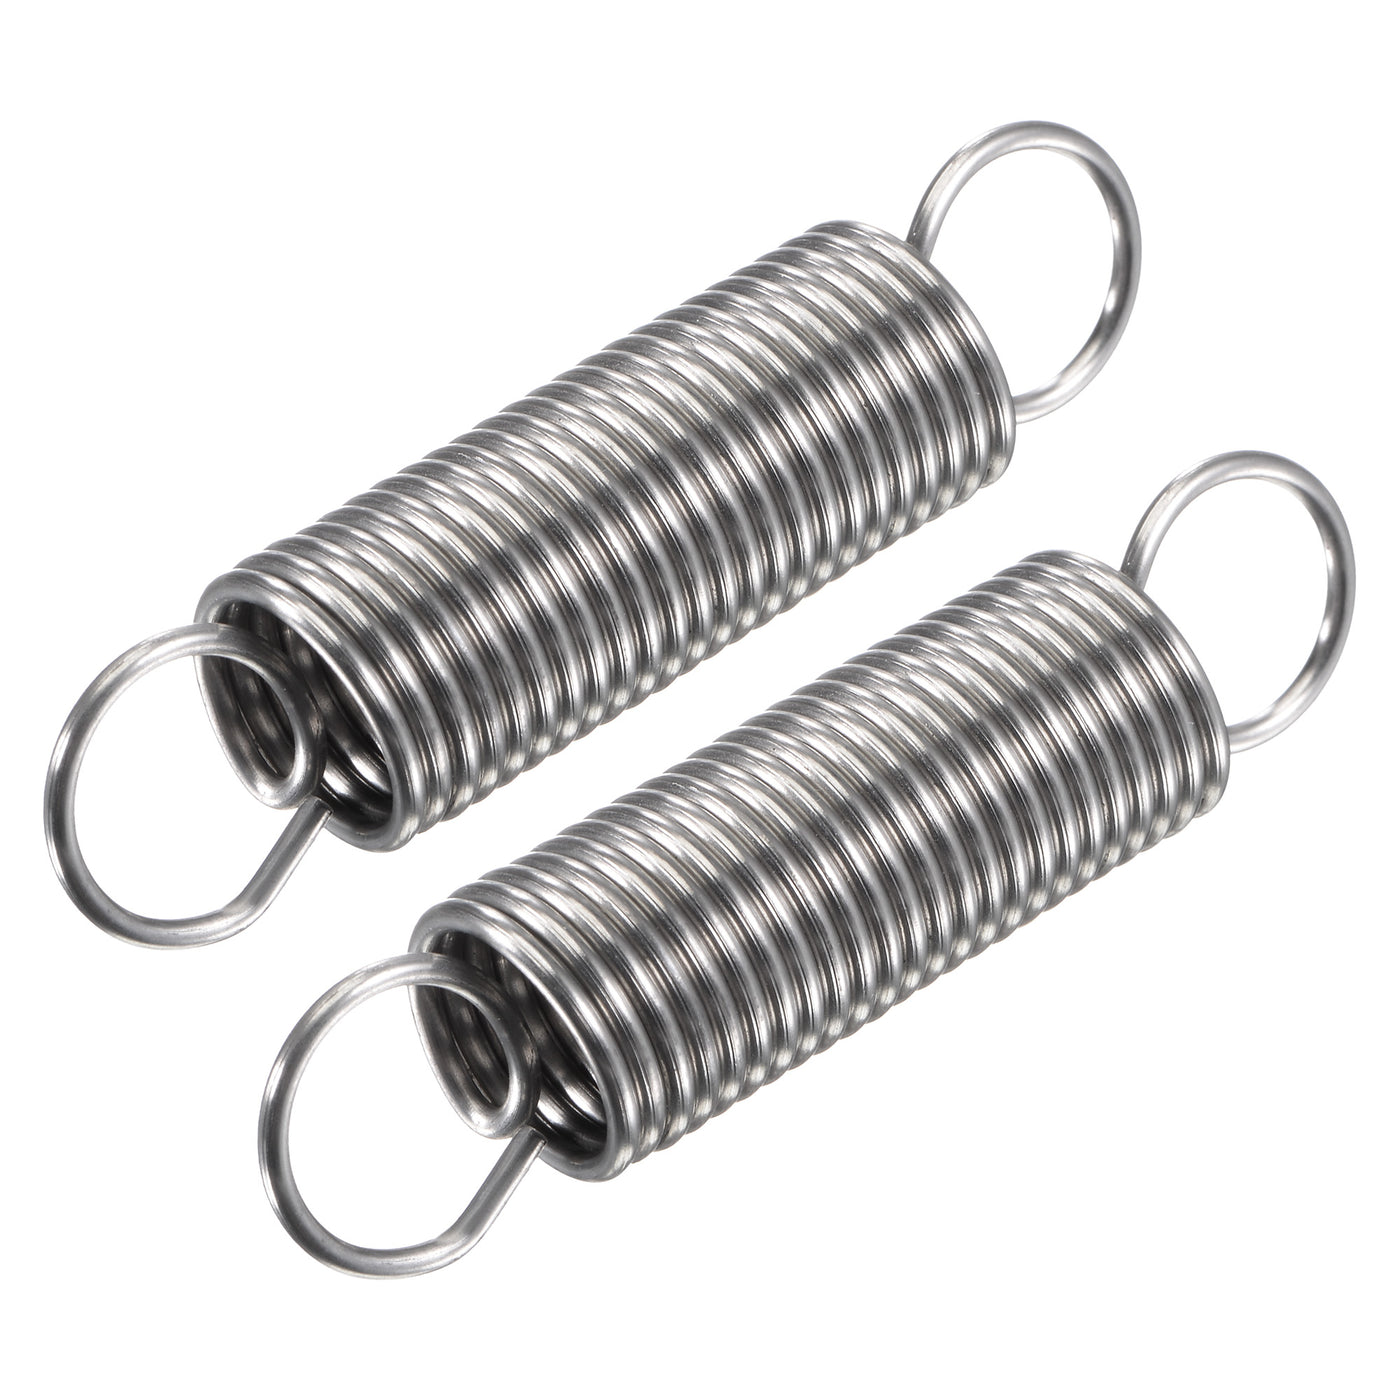 Uxcell Uxcell 1.5mmx15mmx80mm Extended Compression Spring,8.6Lbs Load Capacity,Silver,2pcs